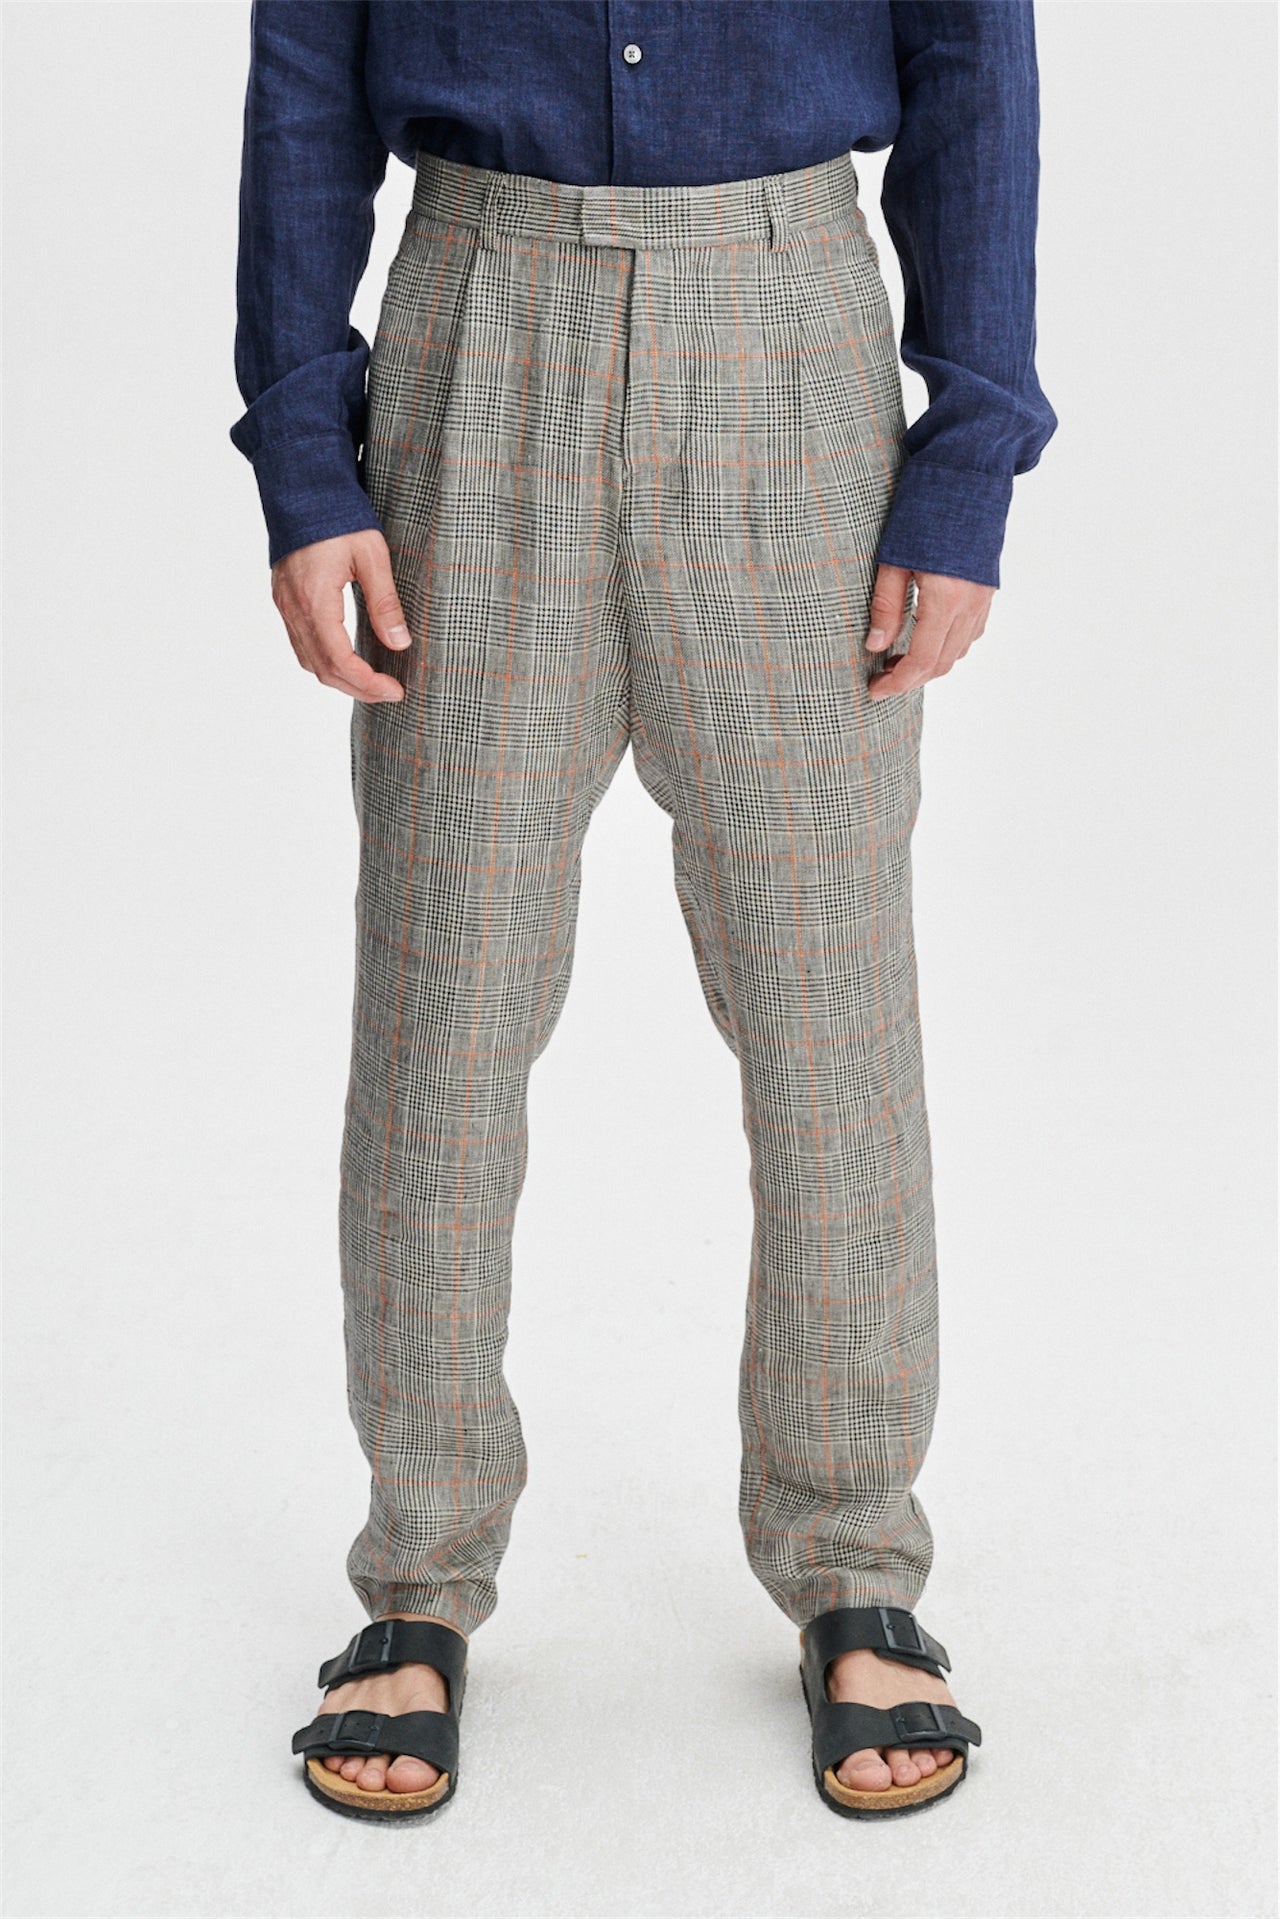 Trousers in a Grey and Vibrant Orange Prince of Wales Italian Linen